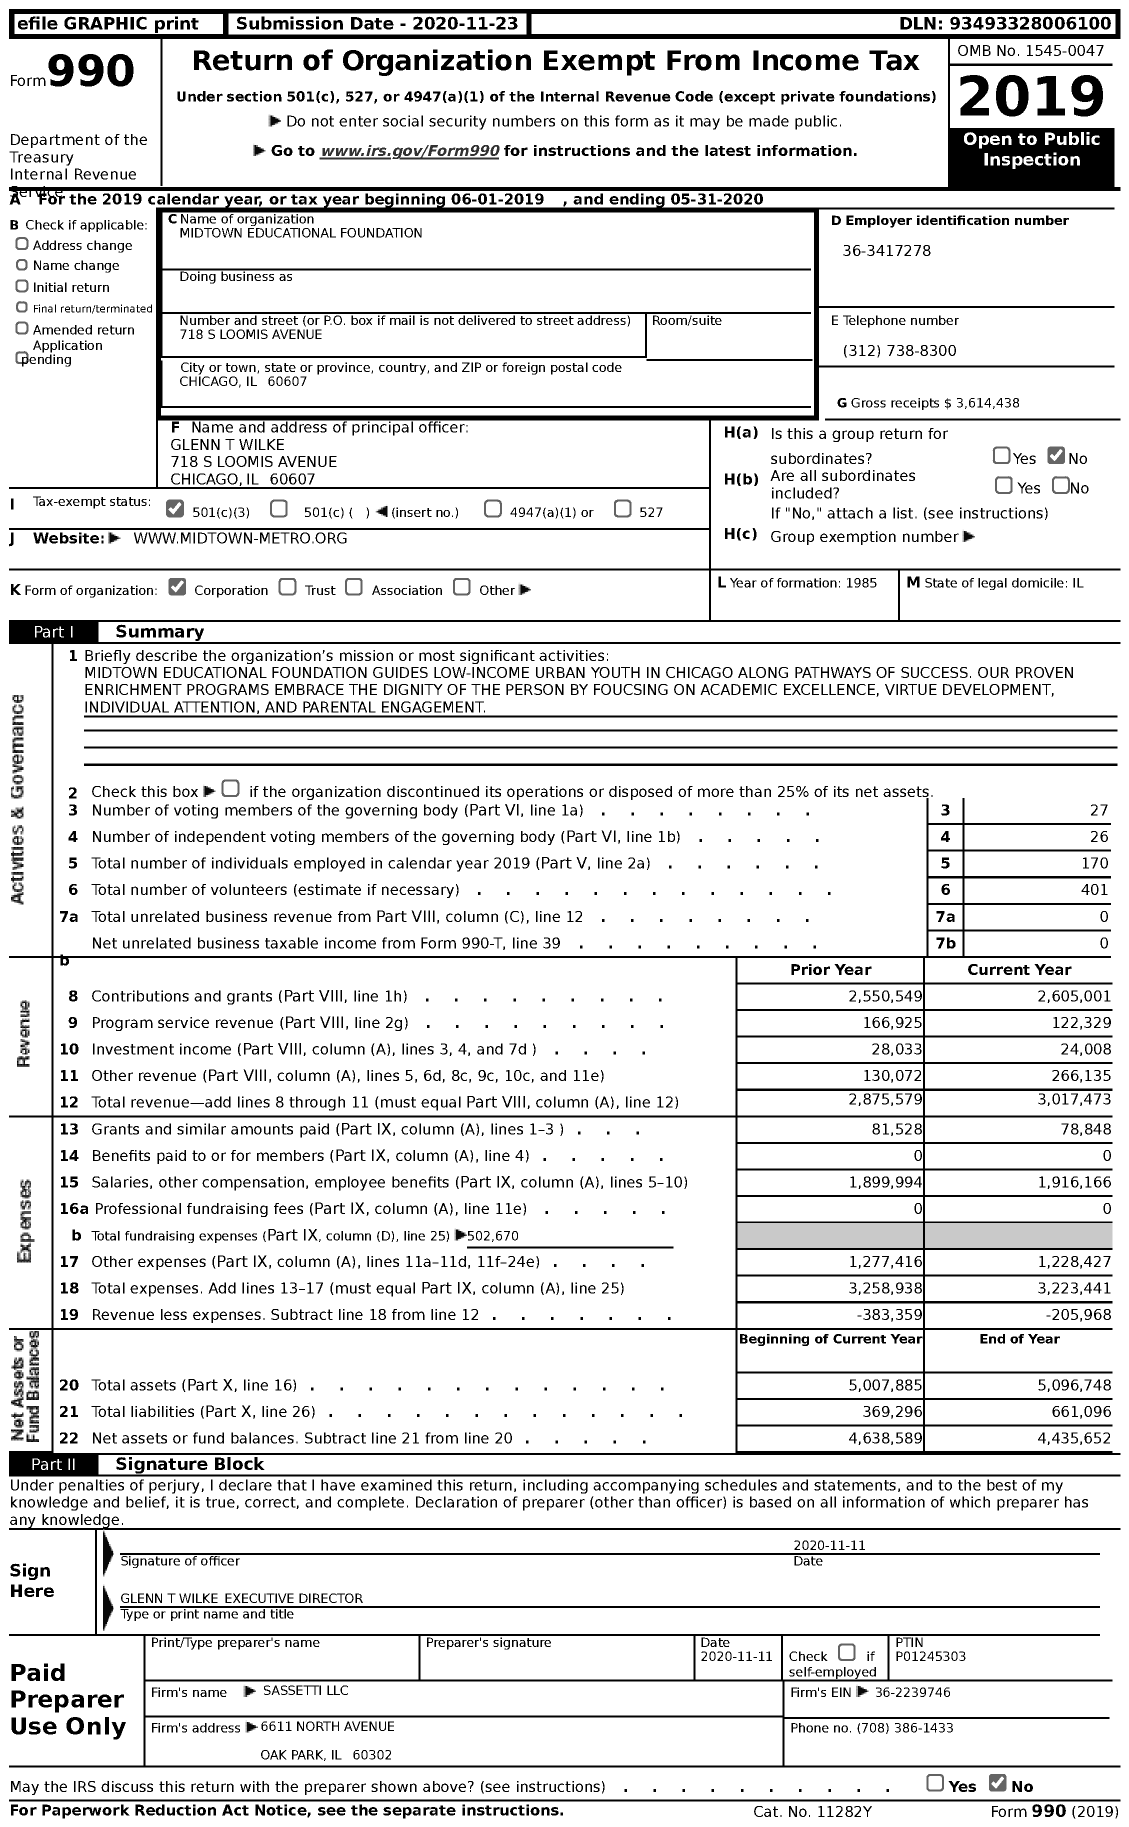 Image of first page of 2019 Form 990 for Midtown Educational Foundation (MEF)